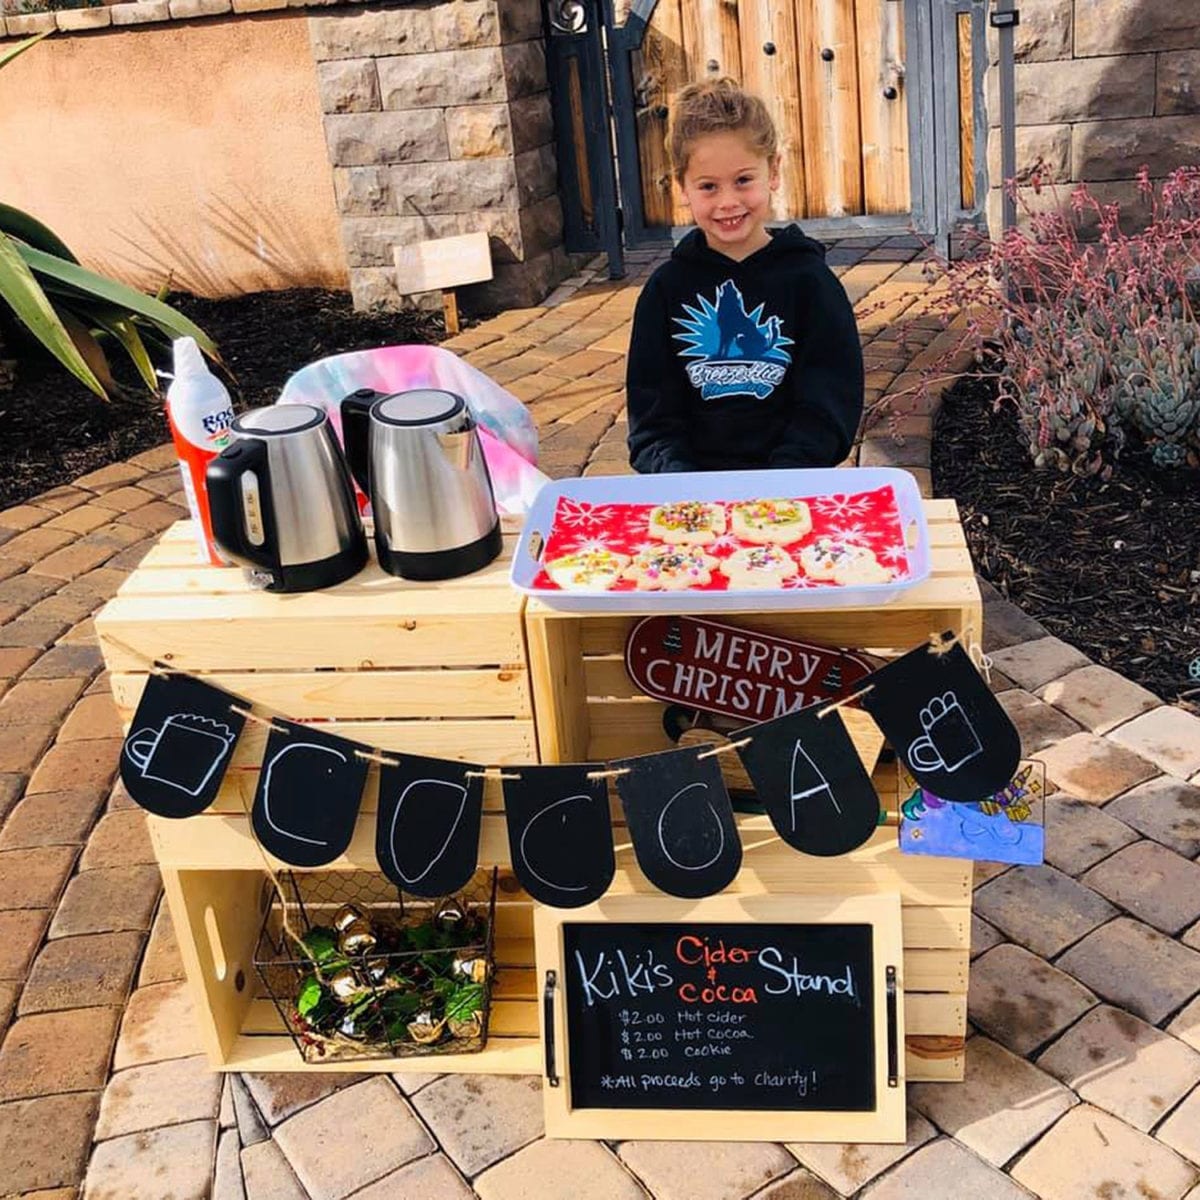 katelynn hardee: this 5-year-old girl hosted a bake sale in order to raise money to pay off 123 of her classmates' school meal debts